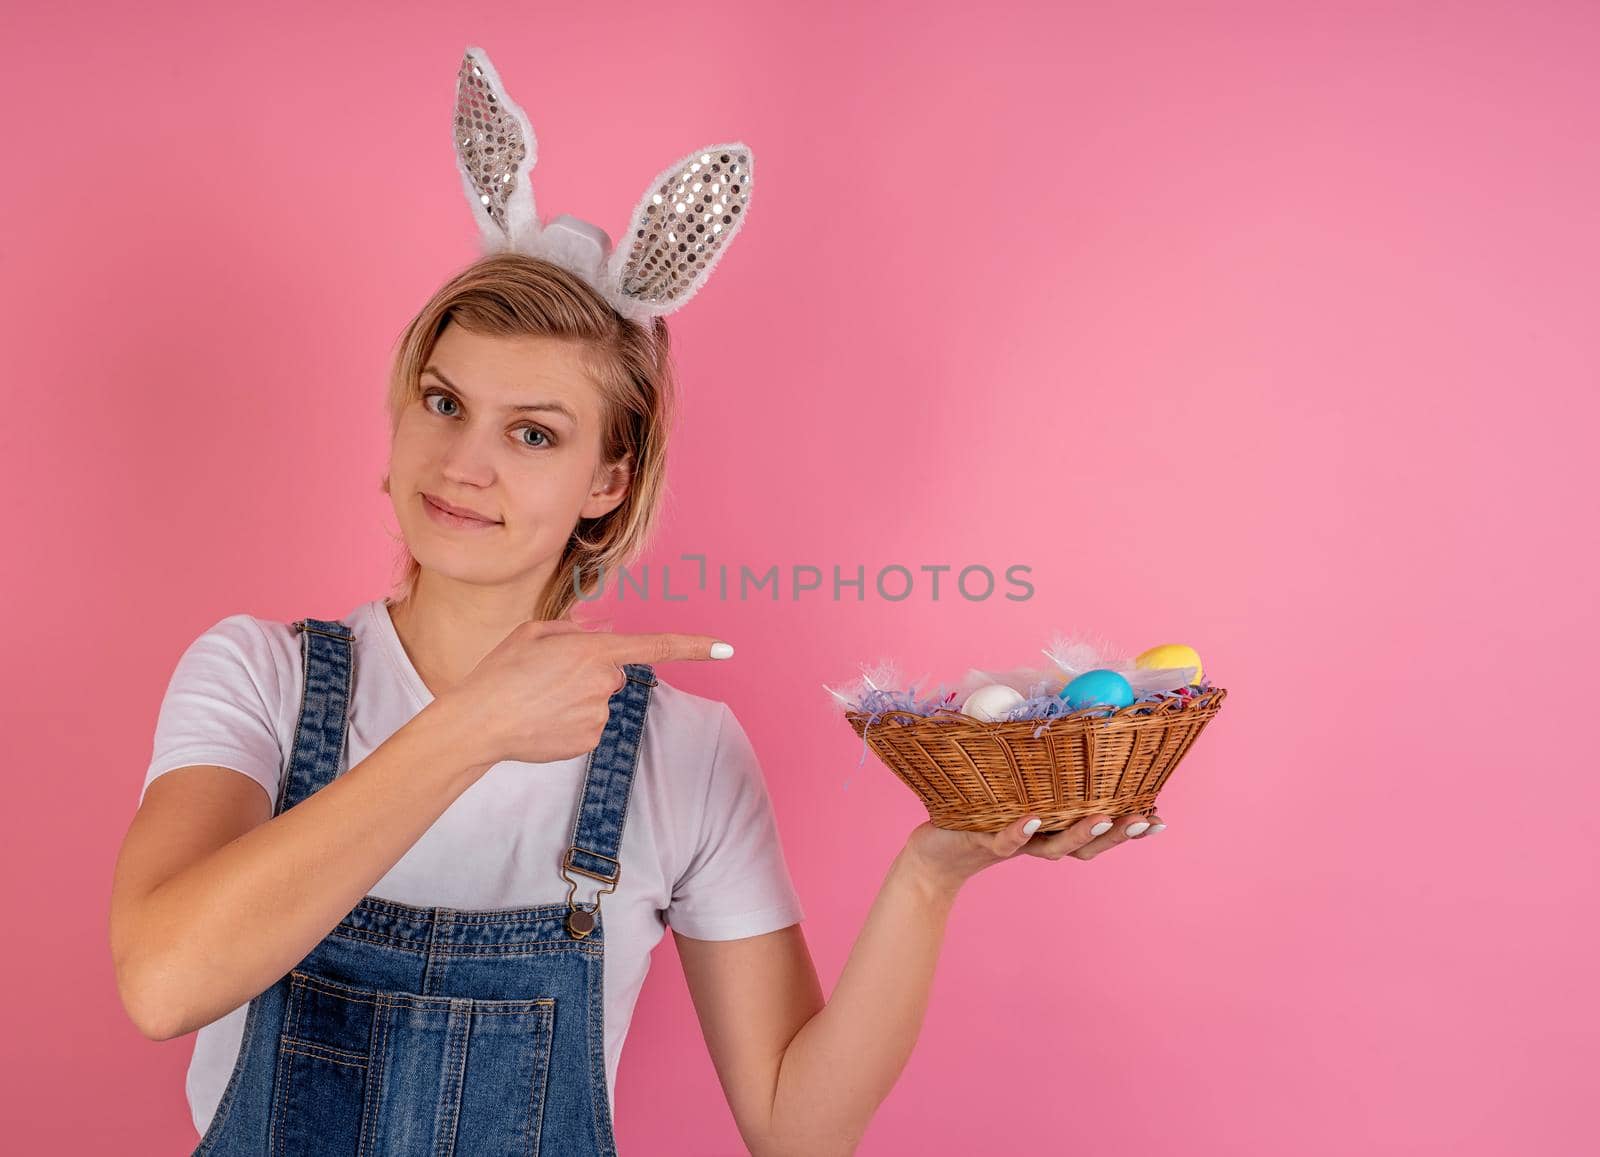 Young woman with bunny ears pointing to the basket with colored Easter eggs isolated on pink background by Desperada